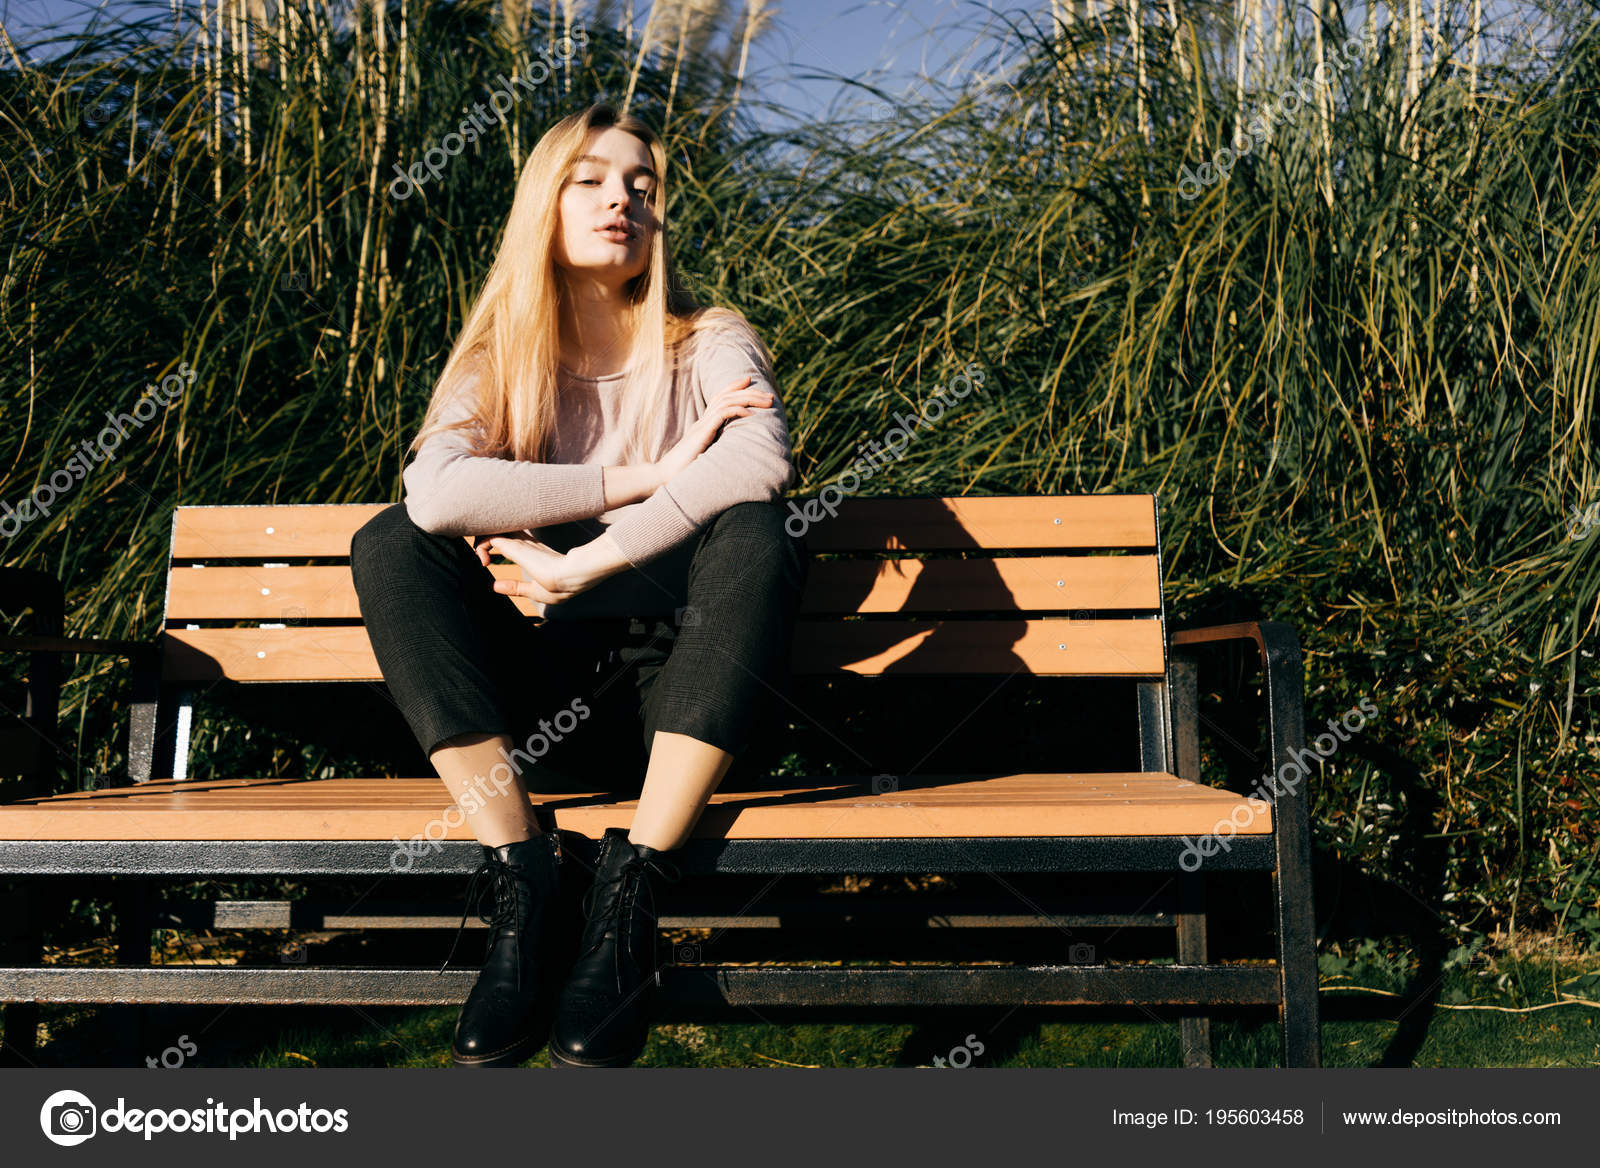 Never look down , unless you are posing for a picture #photoshoot  #photography #bench #gra… | Model poses photography, Portrait photography  poses, Girl photo shoots